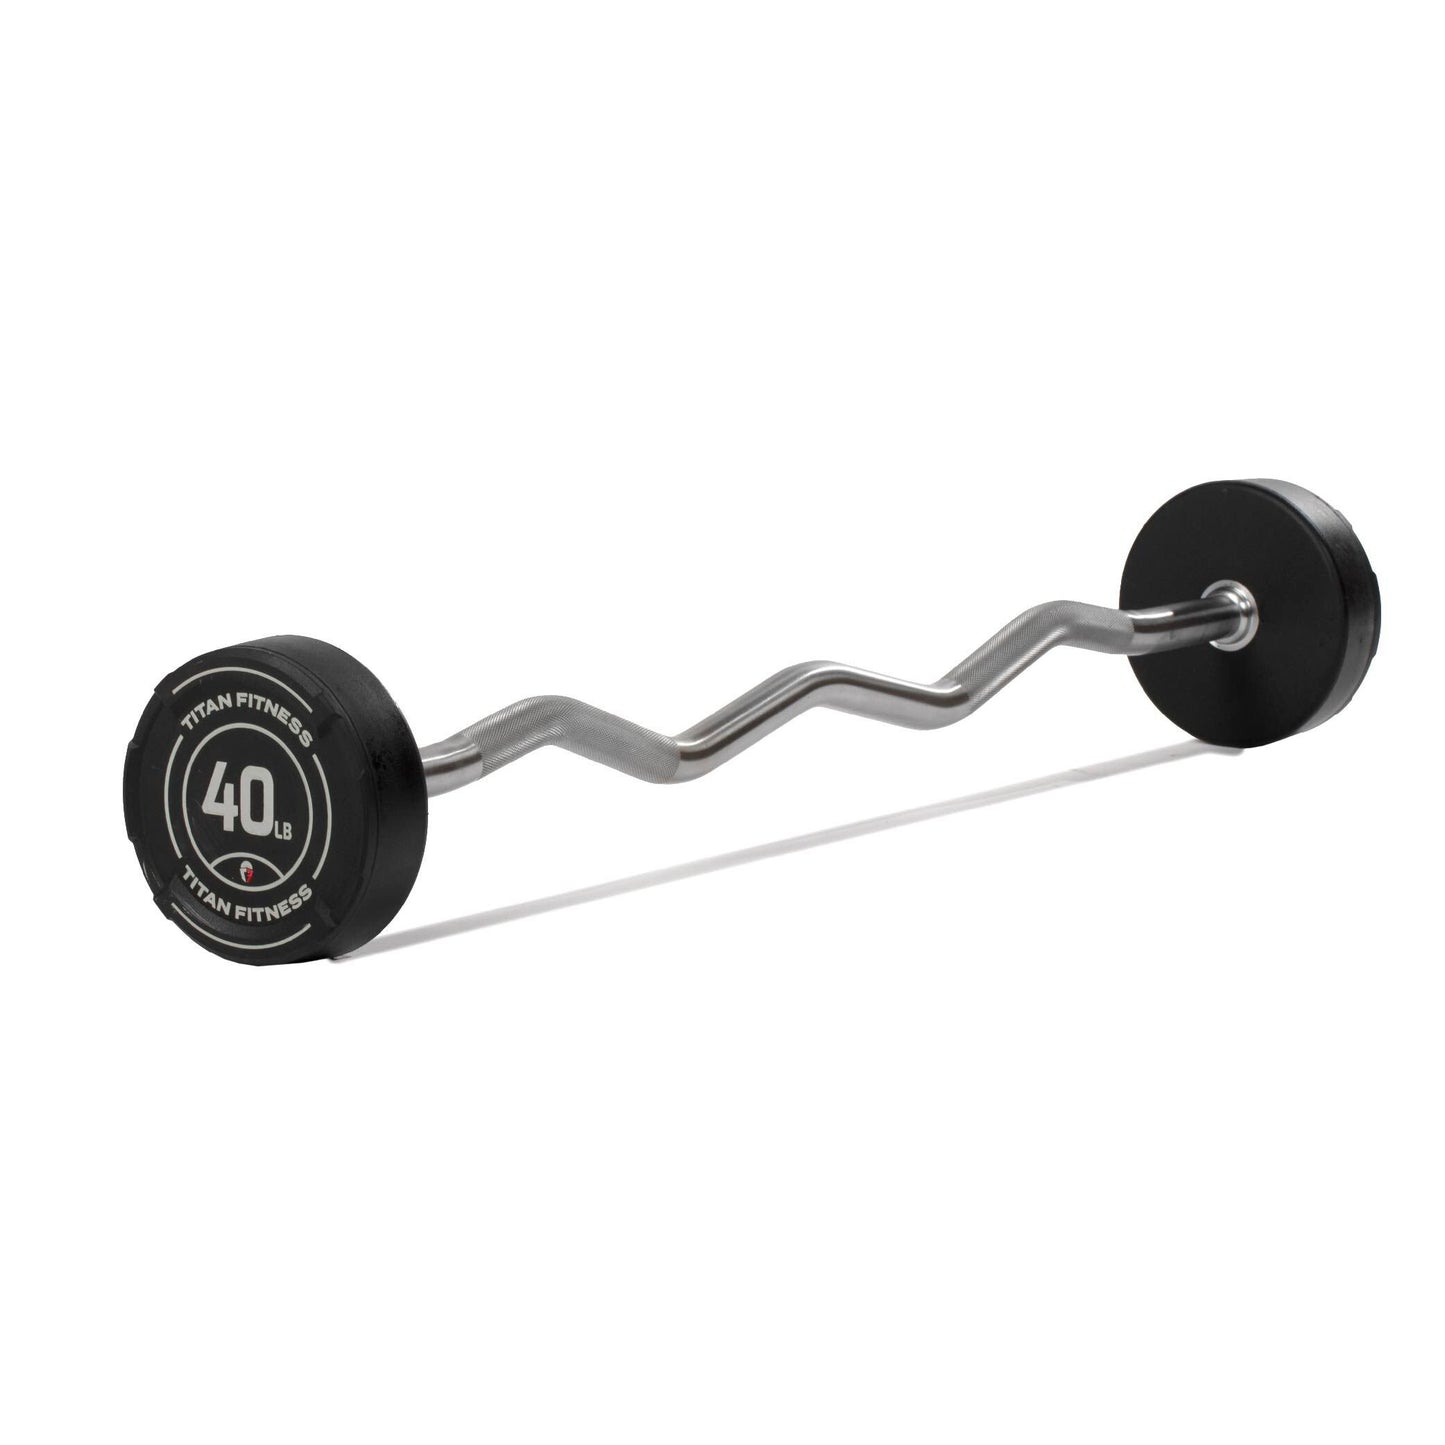 40 LB EZ Curl Fixed Rubber Barbell - view 1